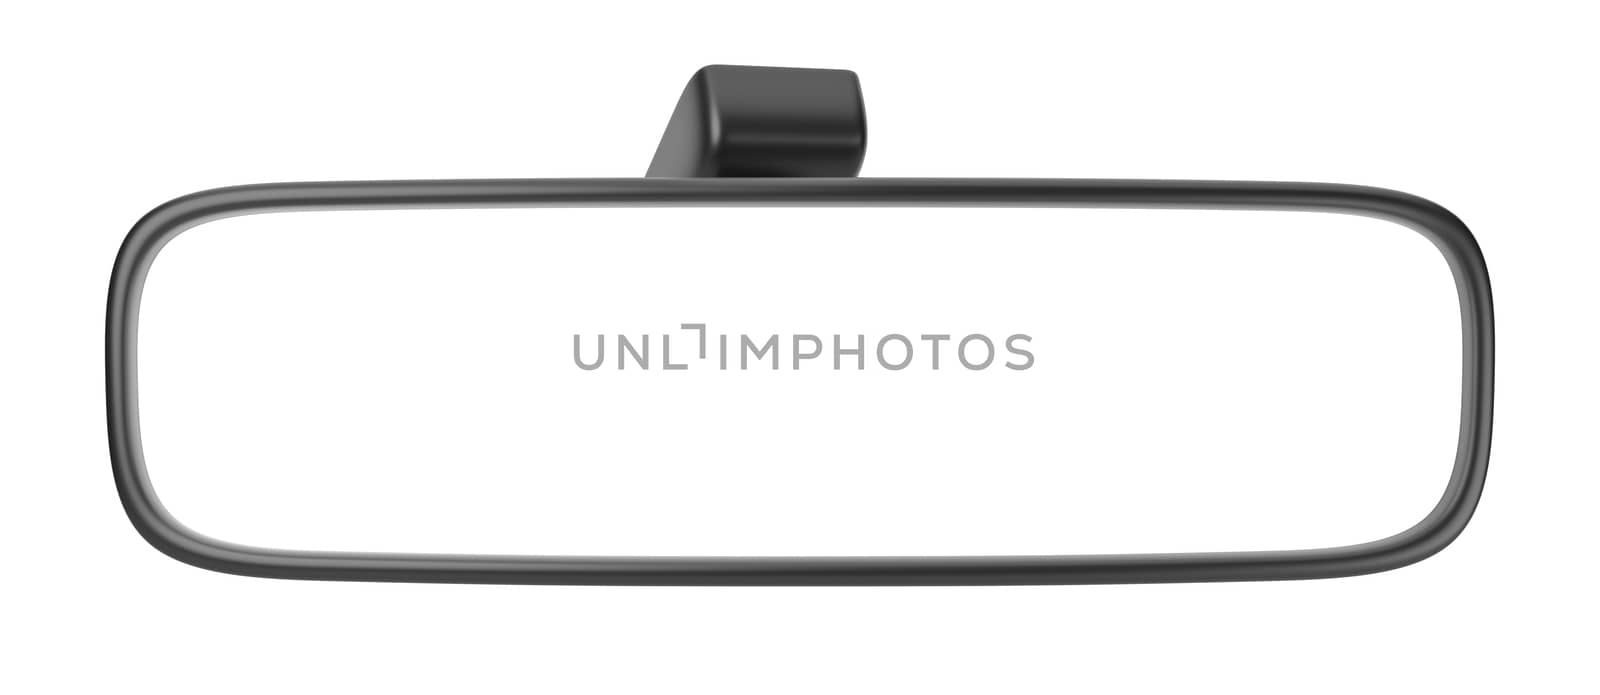 Blank Rearview Mirror Isolated on White 3D Illustration